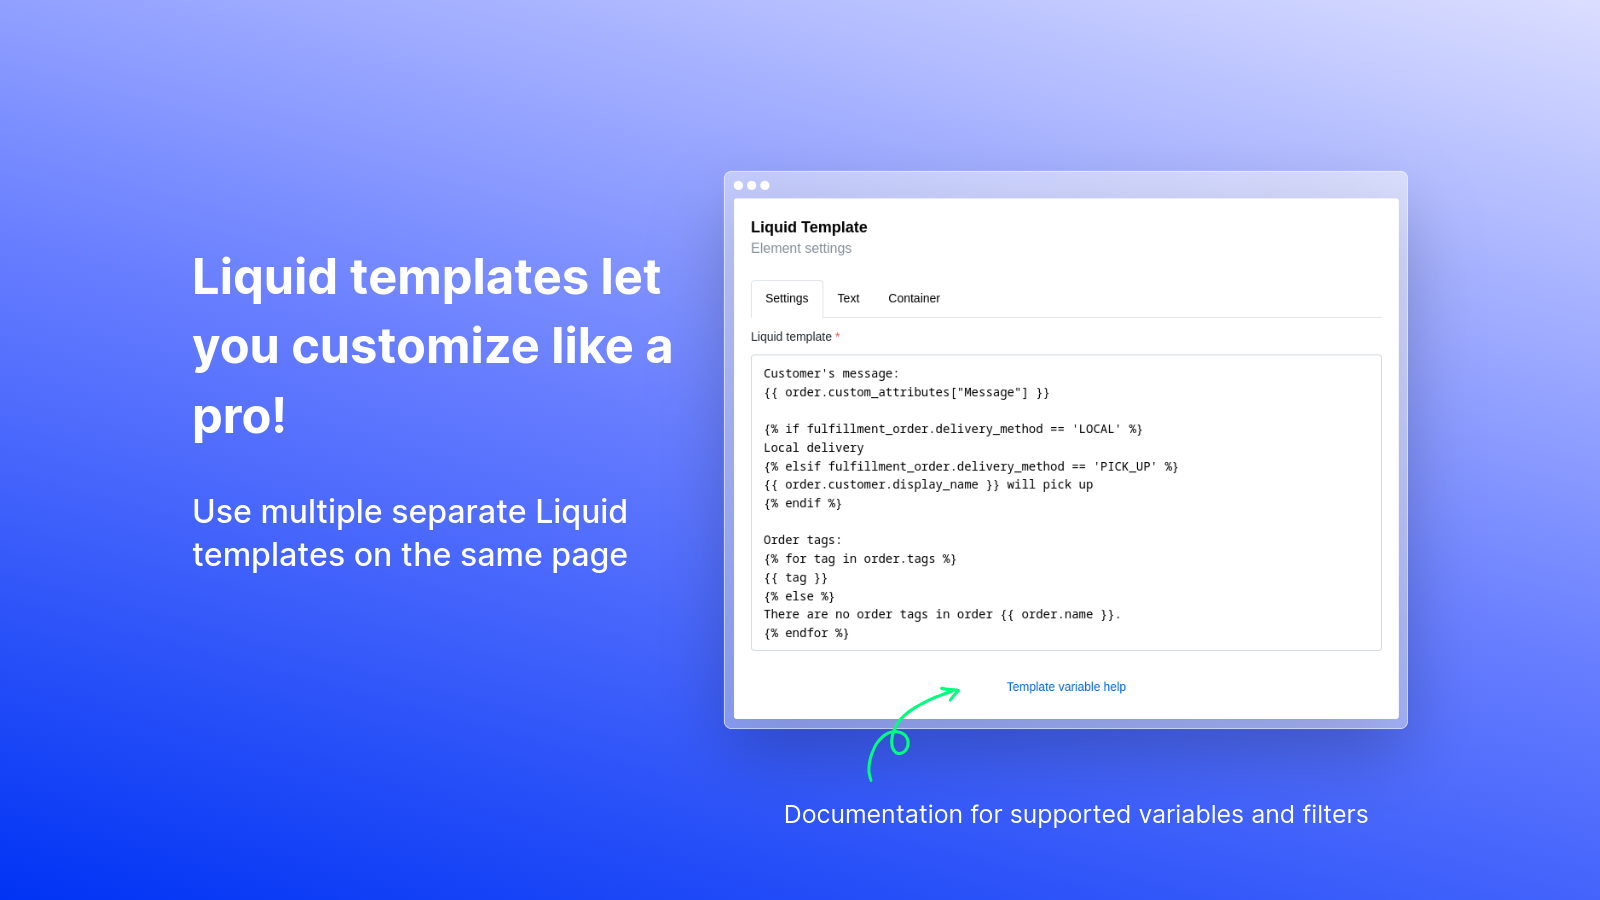 Liquid templates let you customize like a pro!